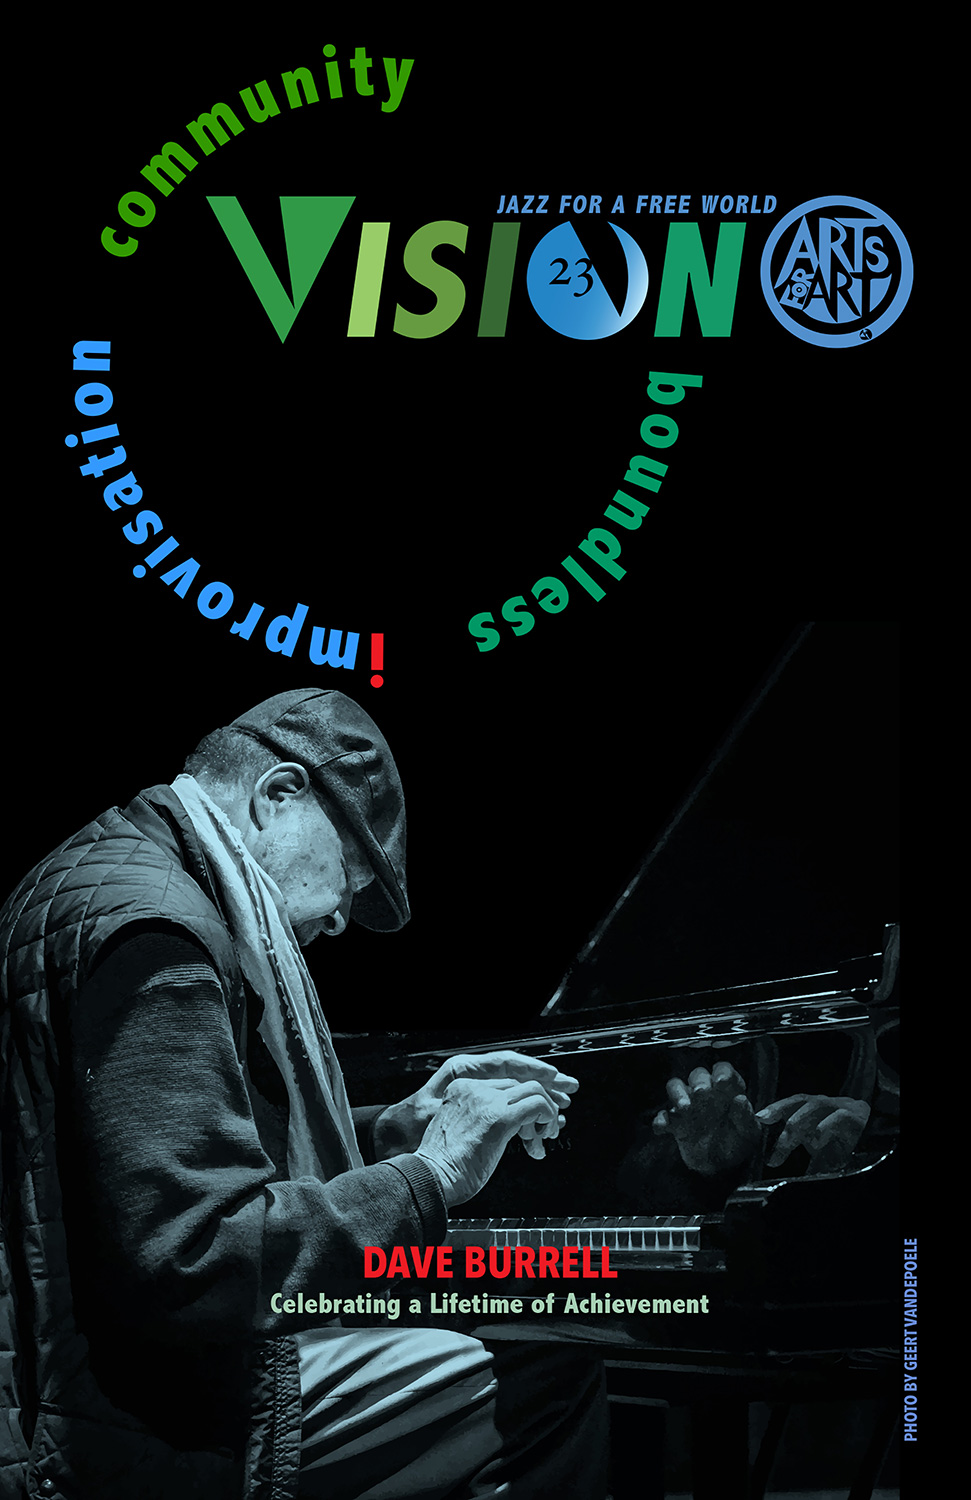 full color cover for the 23 Vision Festival brochure featuring a picture of pianist David Burell and the V23 logo